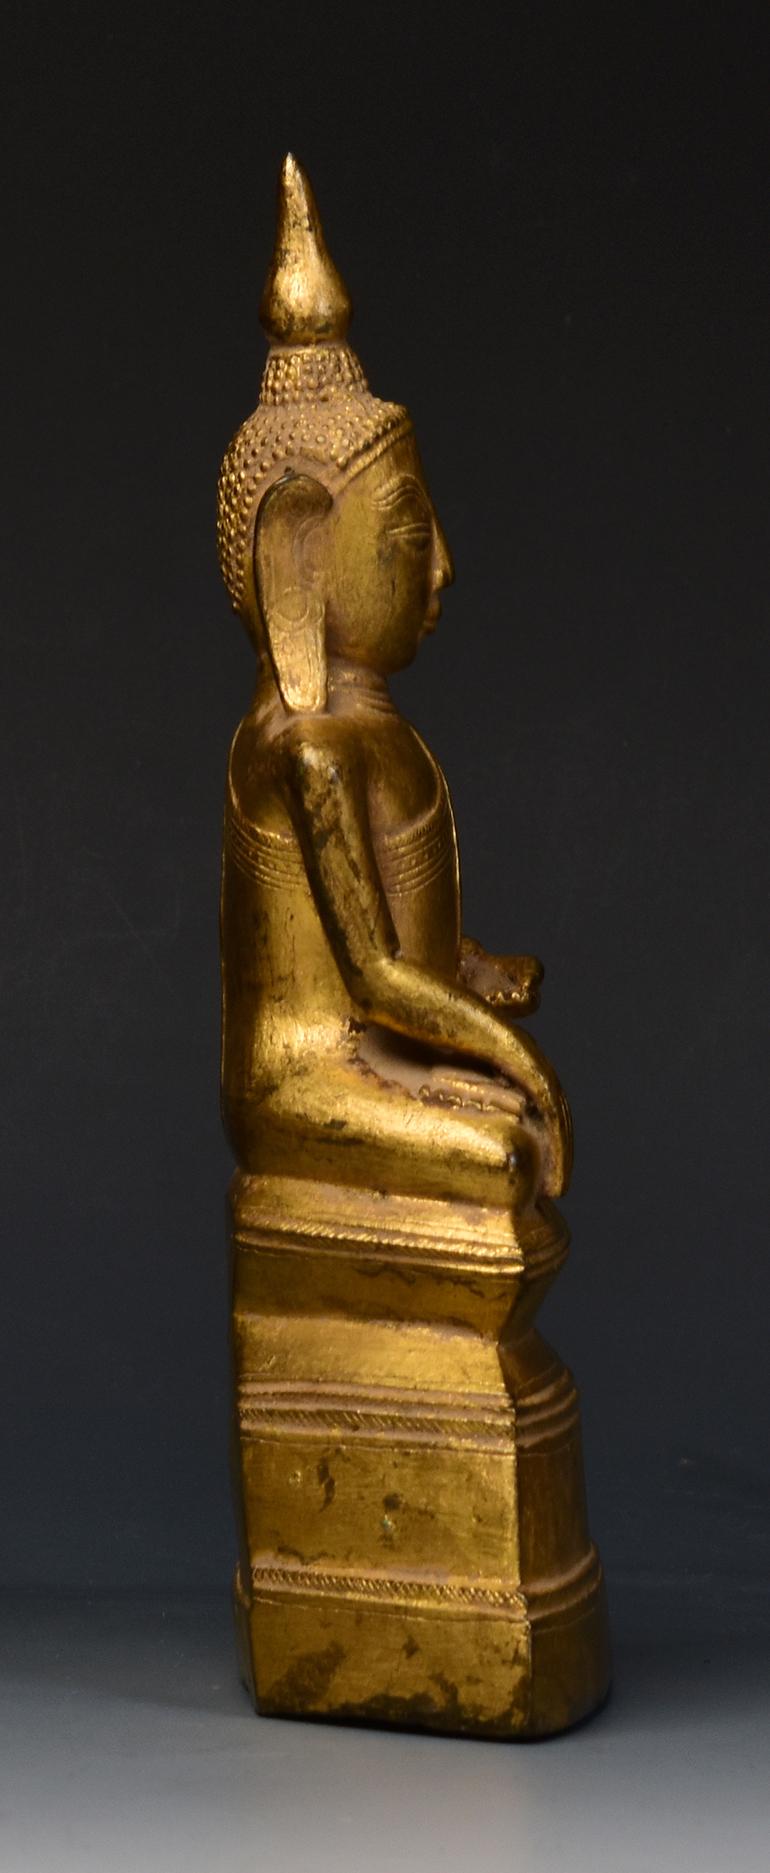 18th Century, Shan, Antique Burmese Bronze Seated Buddha with Gilded Gold 6